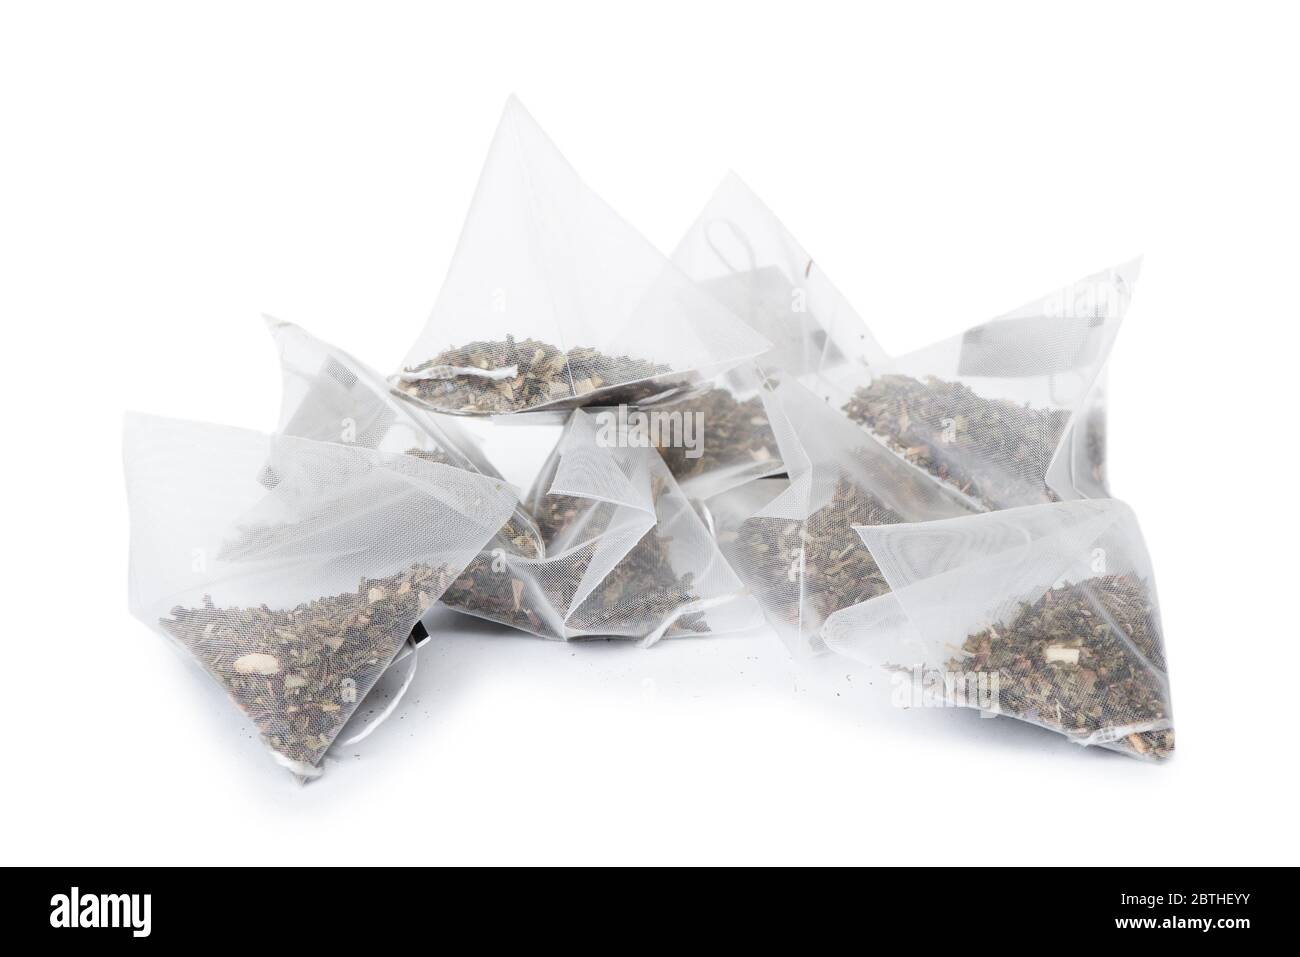 Download Page 2 Pyramid Tea Bag High Resolution Stock Photography And Images Alamy Yellowimages Mockups